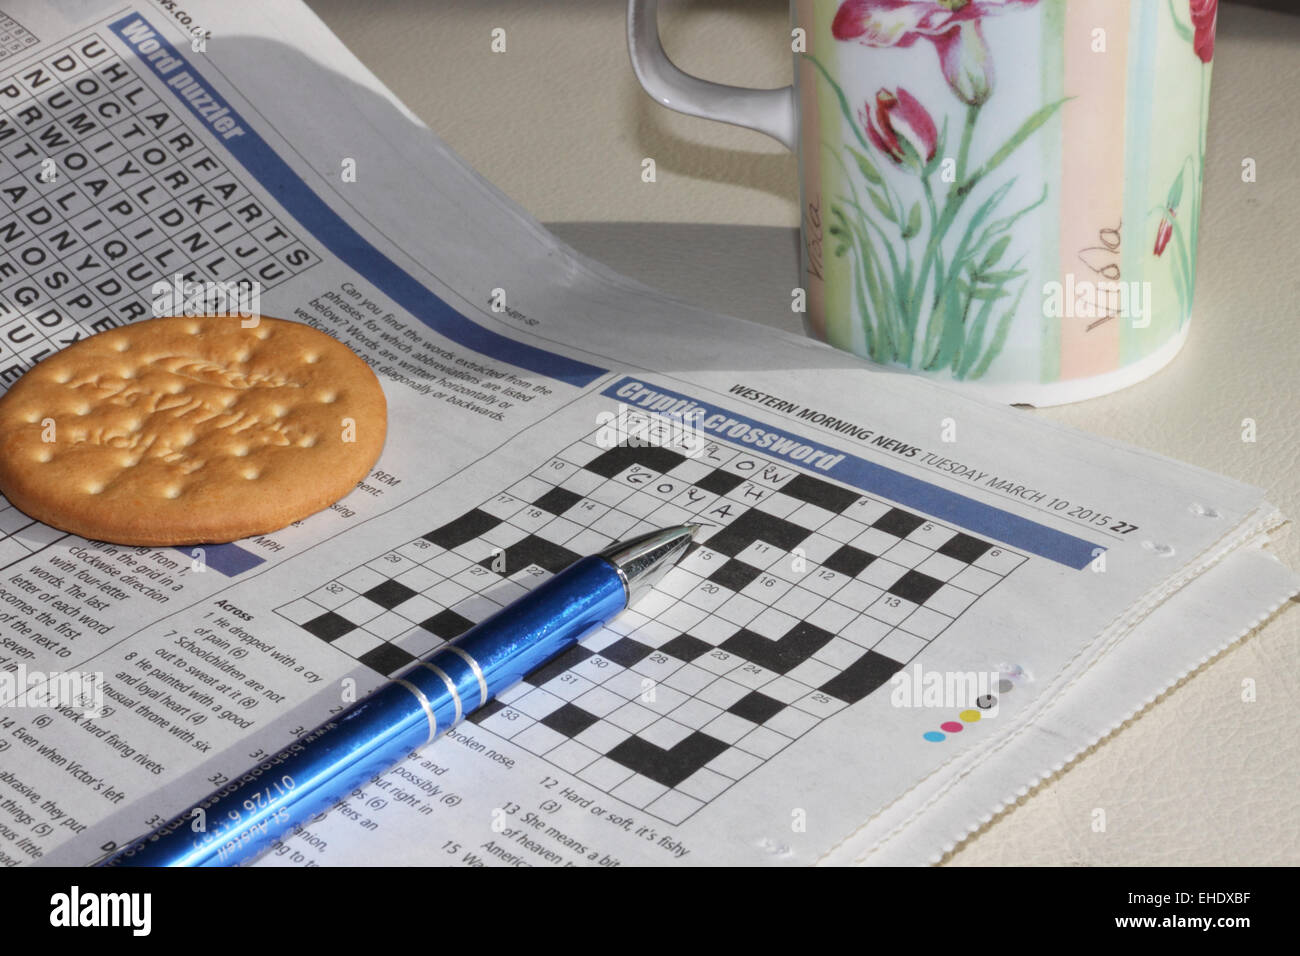 A newspaper open at the crossword page with a pen, mug and biscuit. Stock Photo